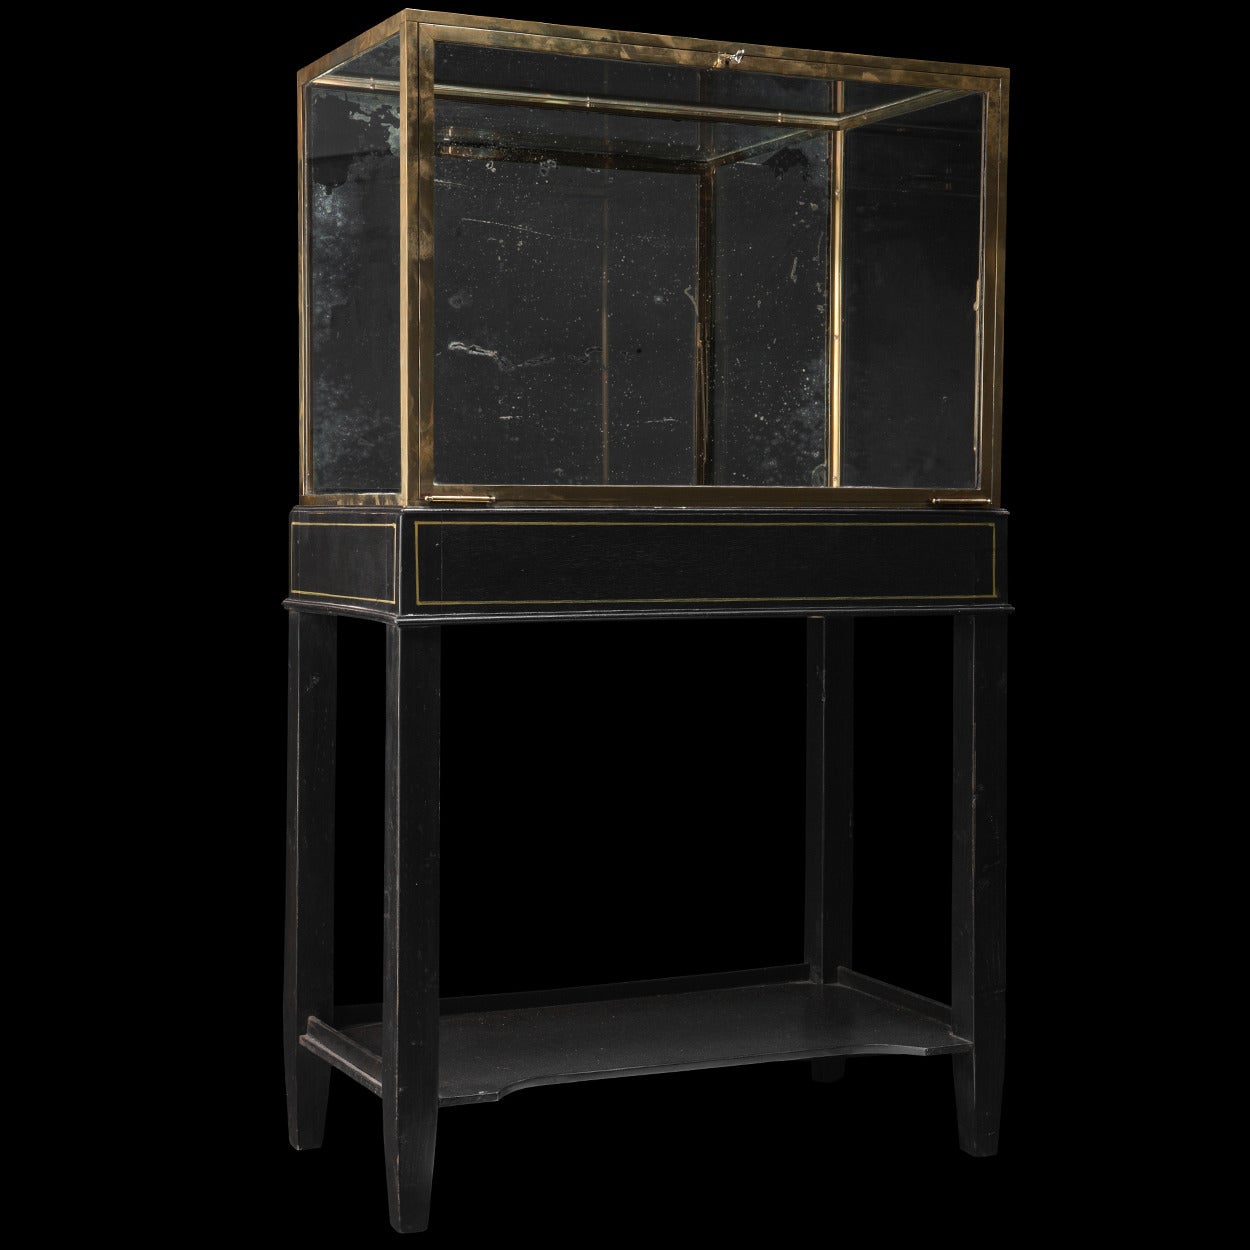 Brass display cabinet with original glass panels on ebonized base. 

Made in England circa 1880.